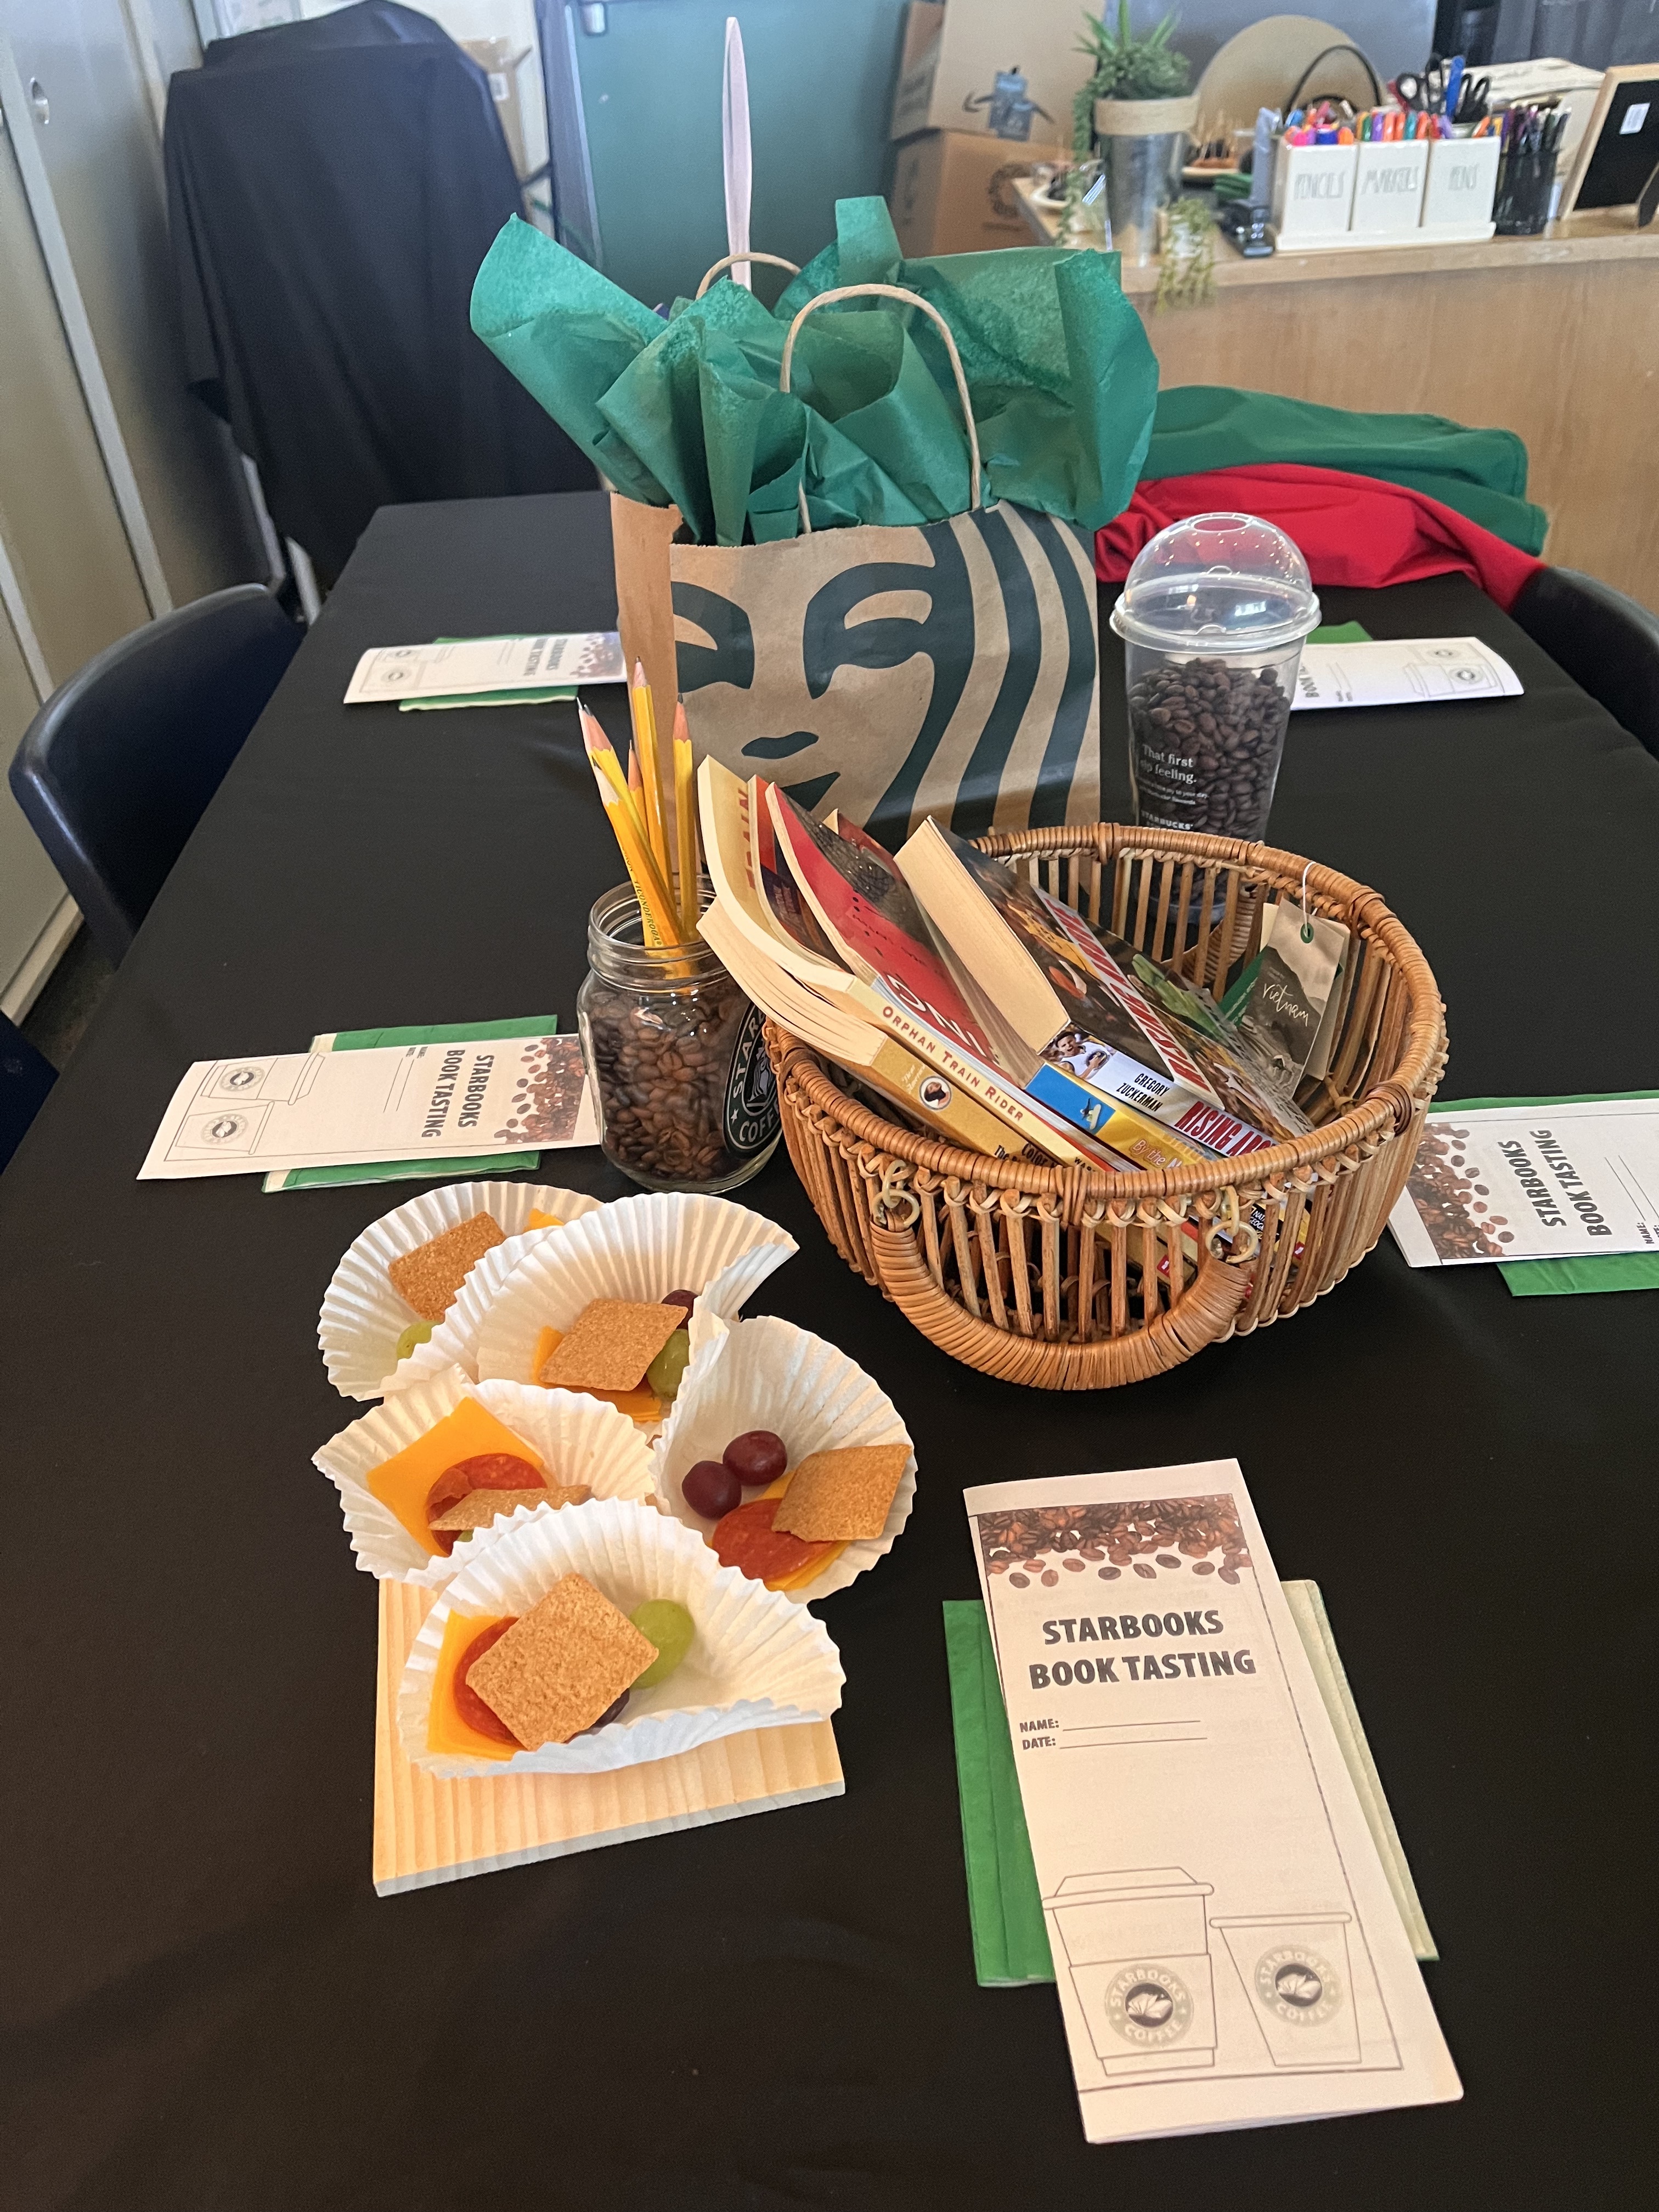 Table with snacks at book tasting event